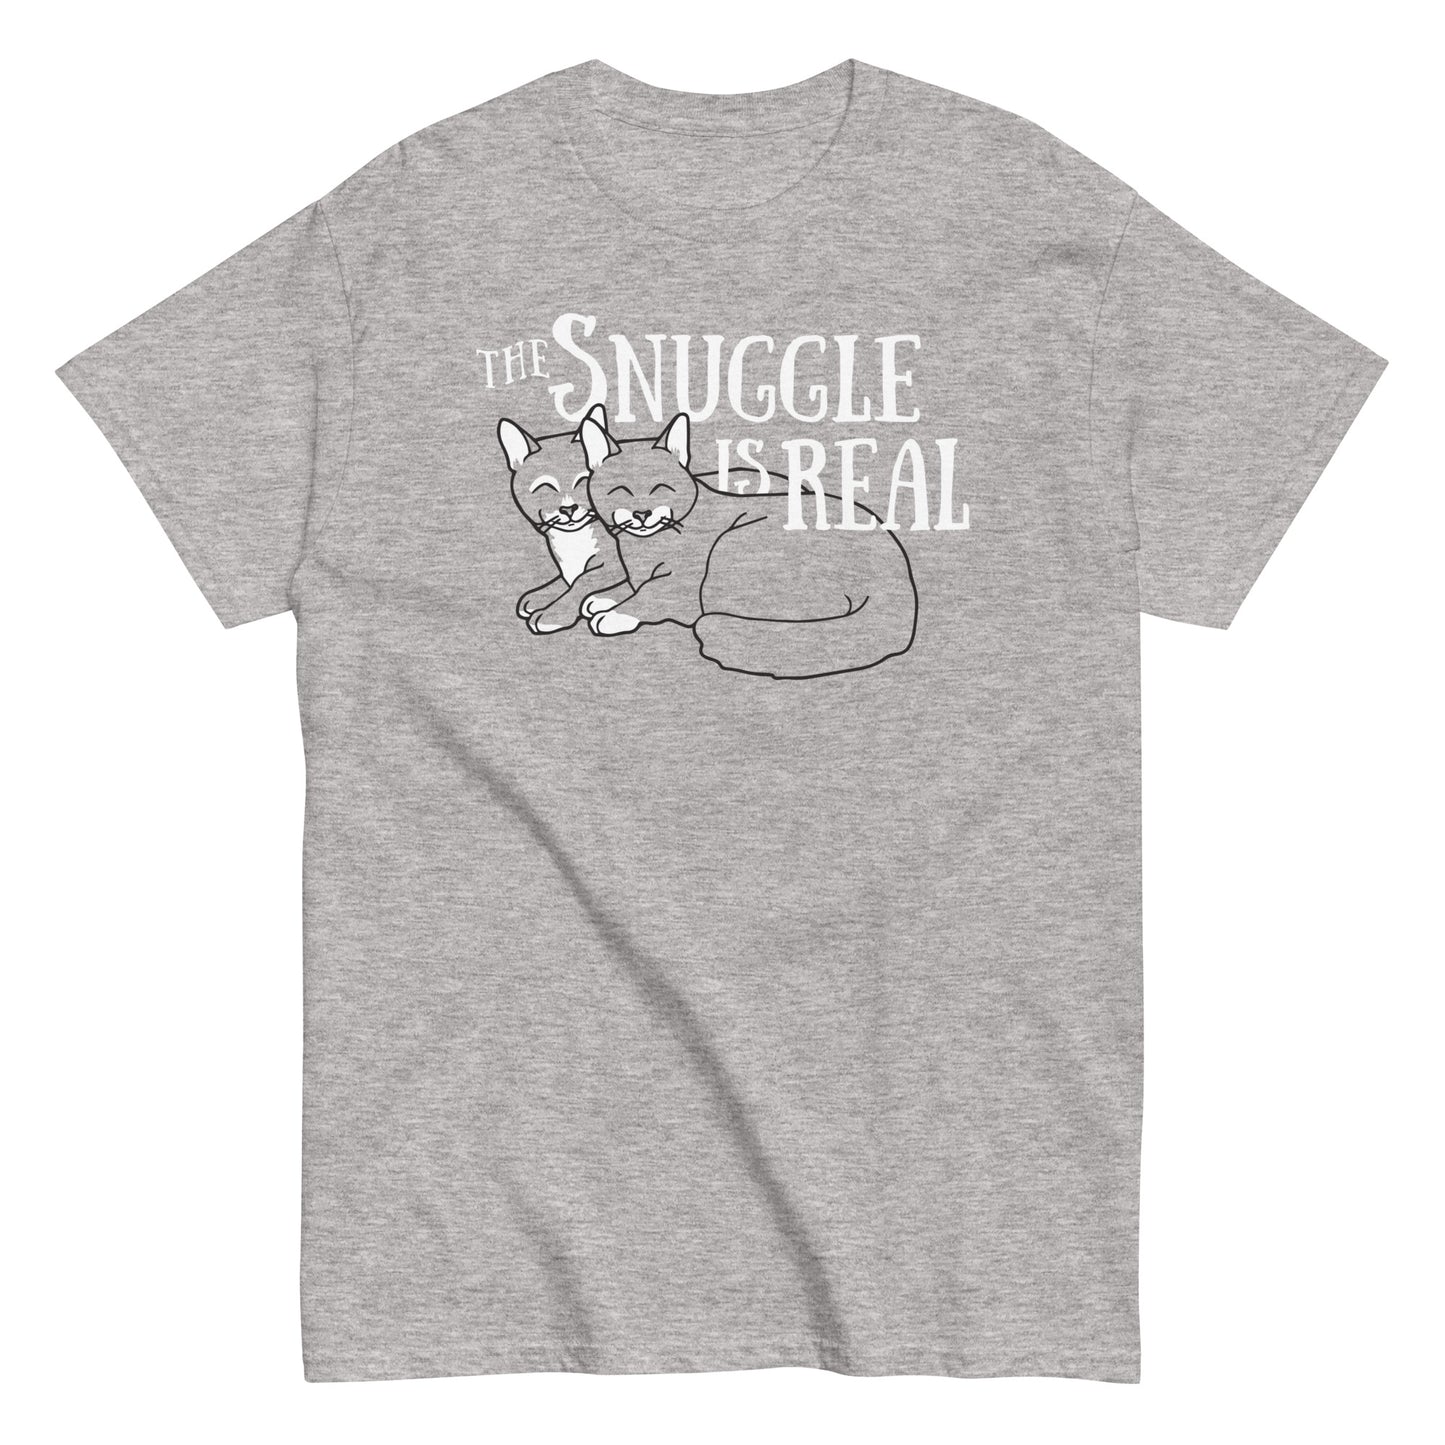 The Snuggle Is Real Men's Classic Tee